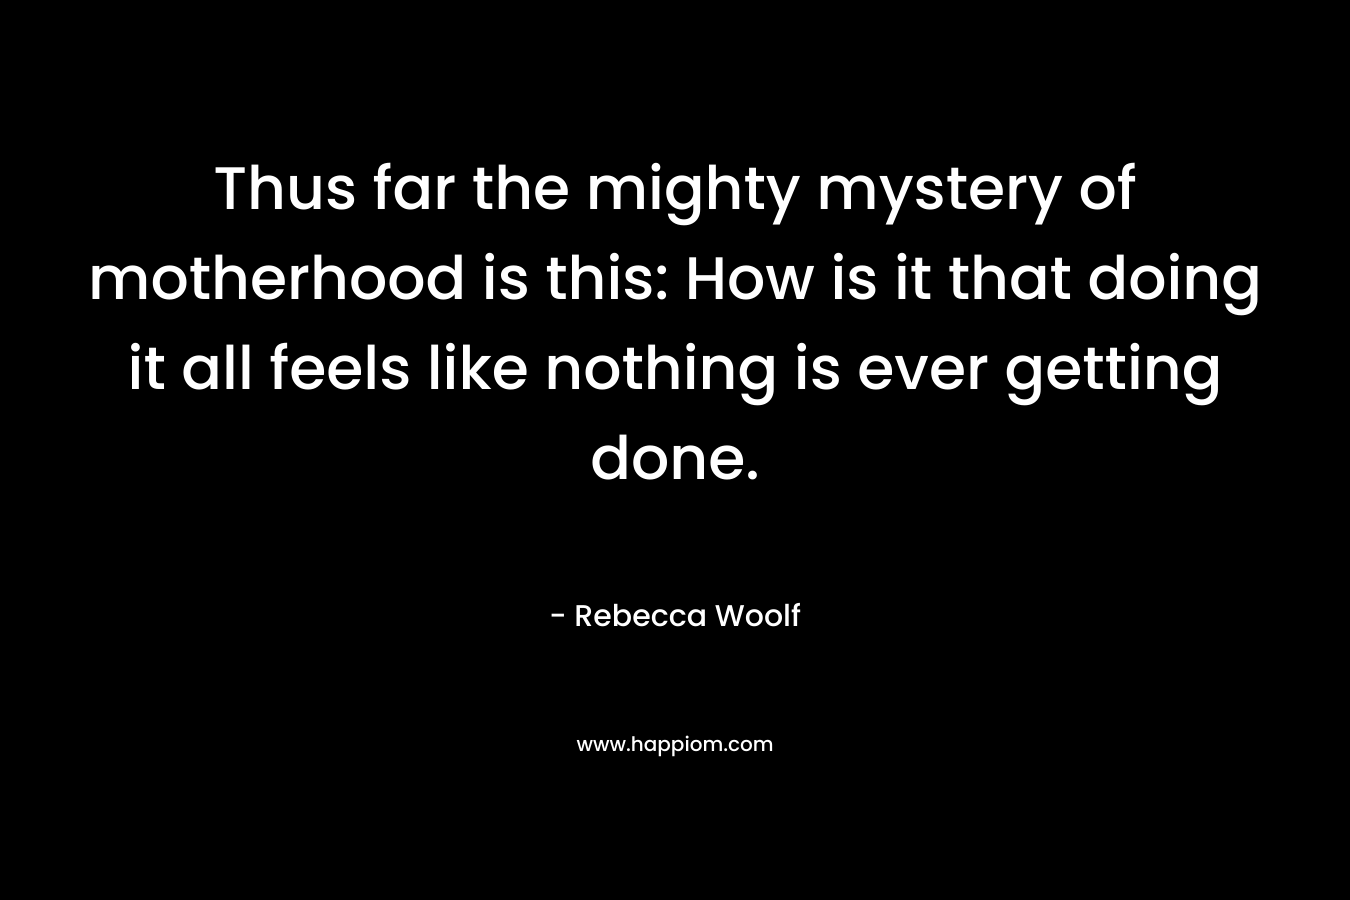 Thus far the mighty mystery of motherhood is this: How is it that doing it all feels like nothing is ever getting done.